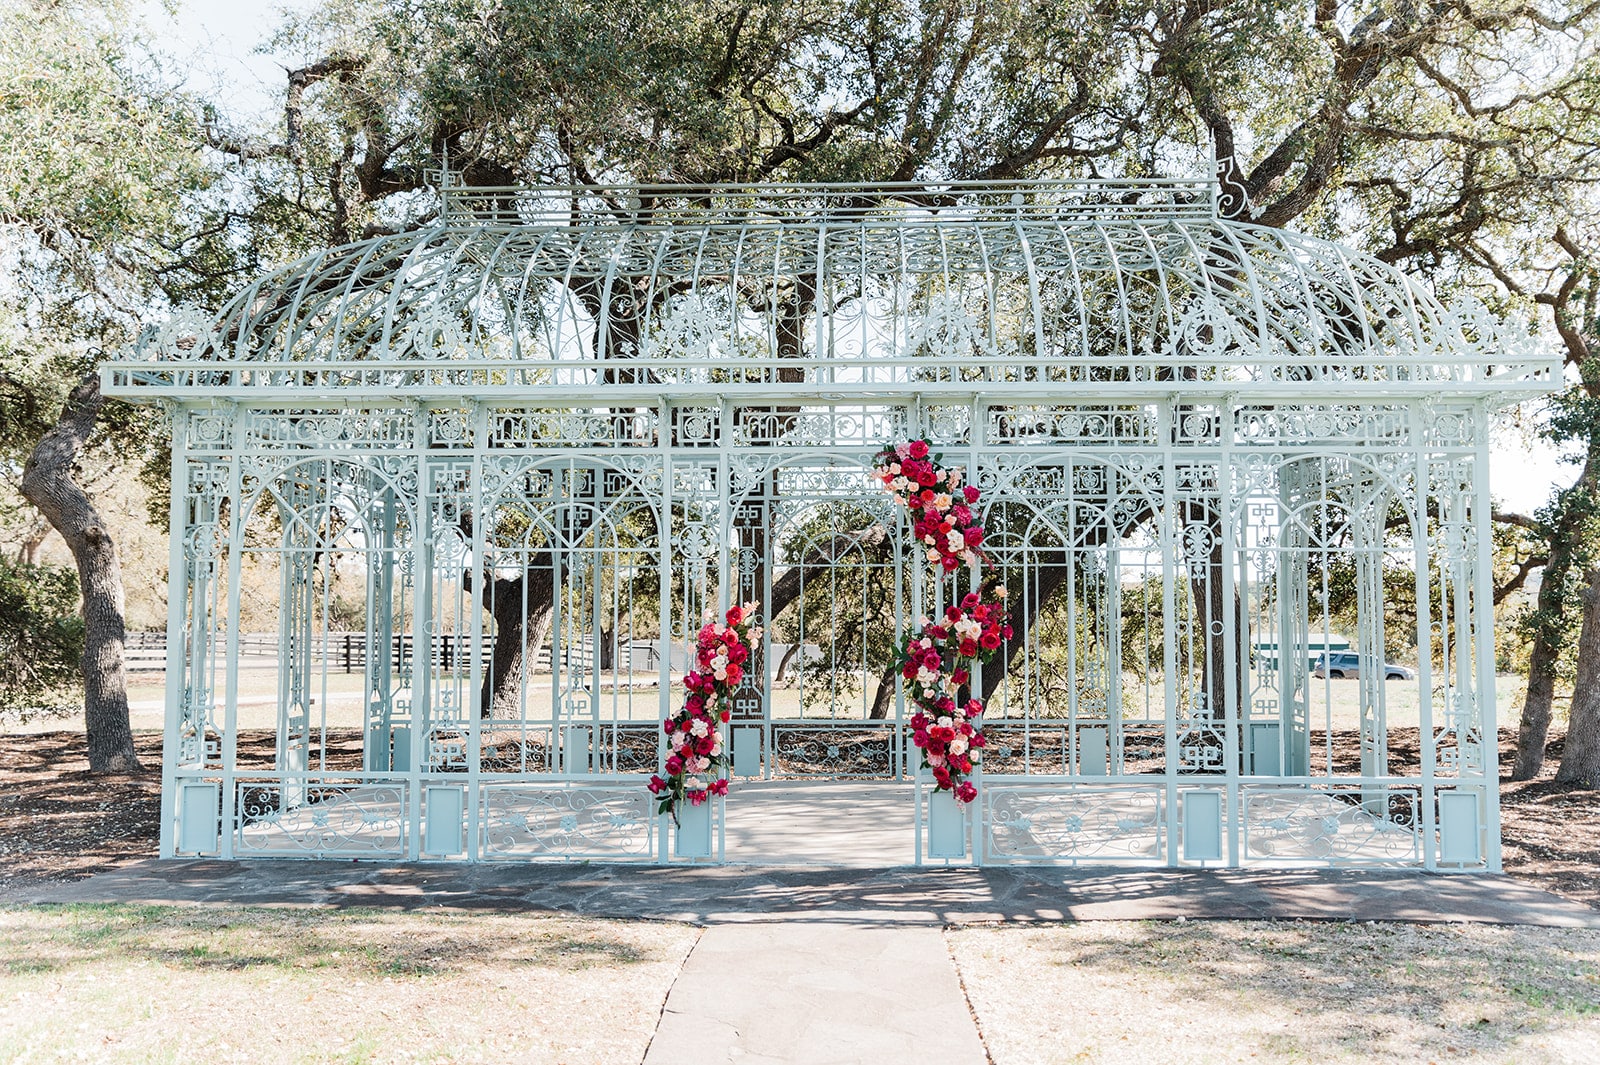 Colorful Texas Wedding - Hill Country wedding venue in Dripping Springs